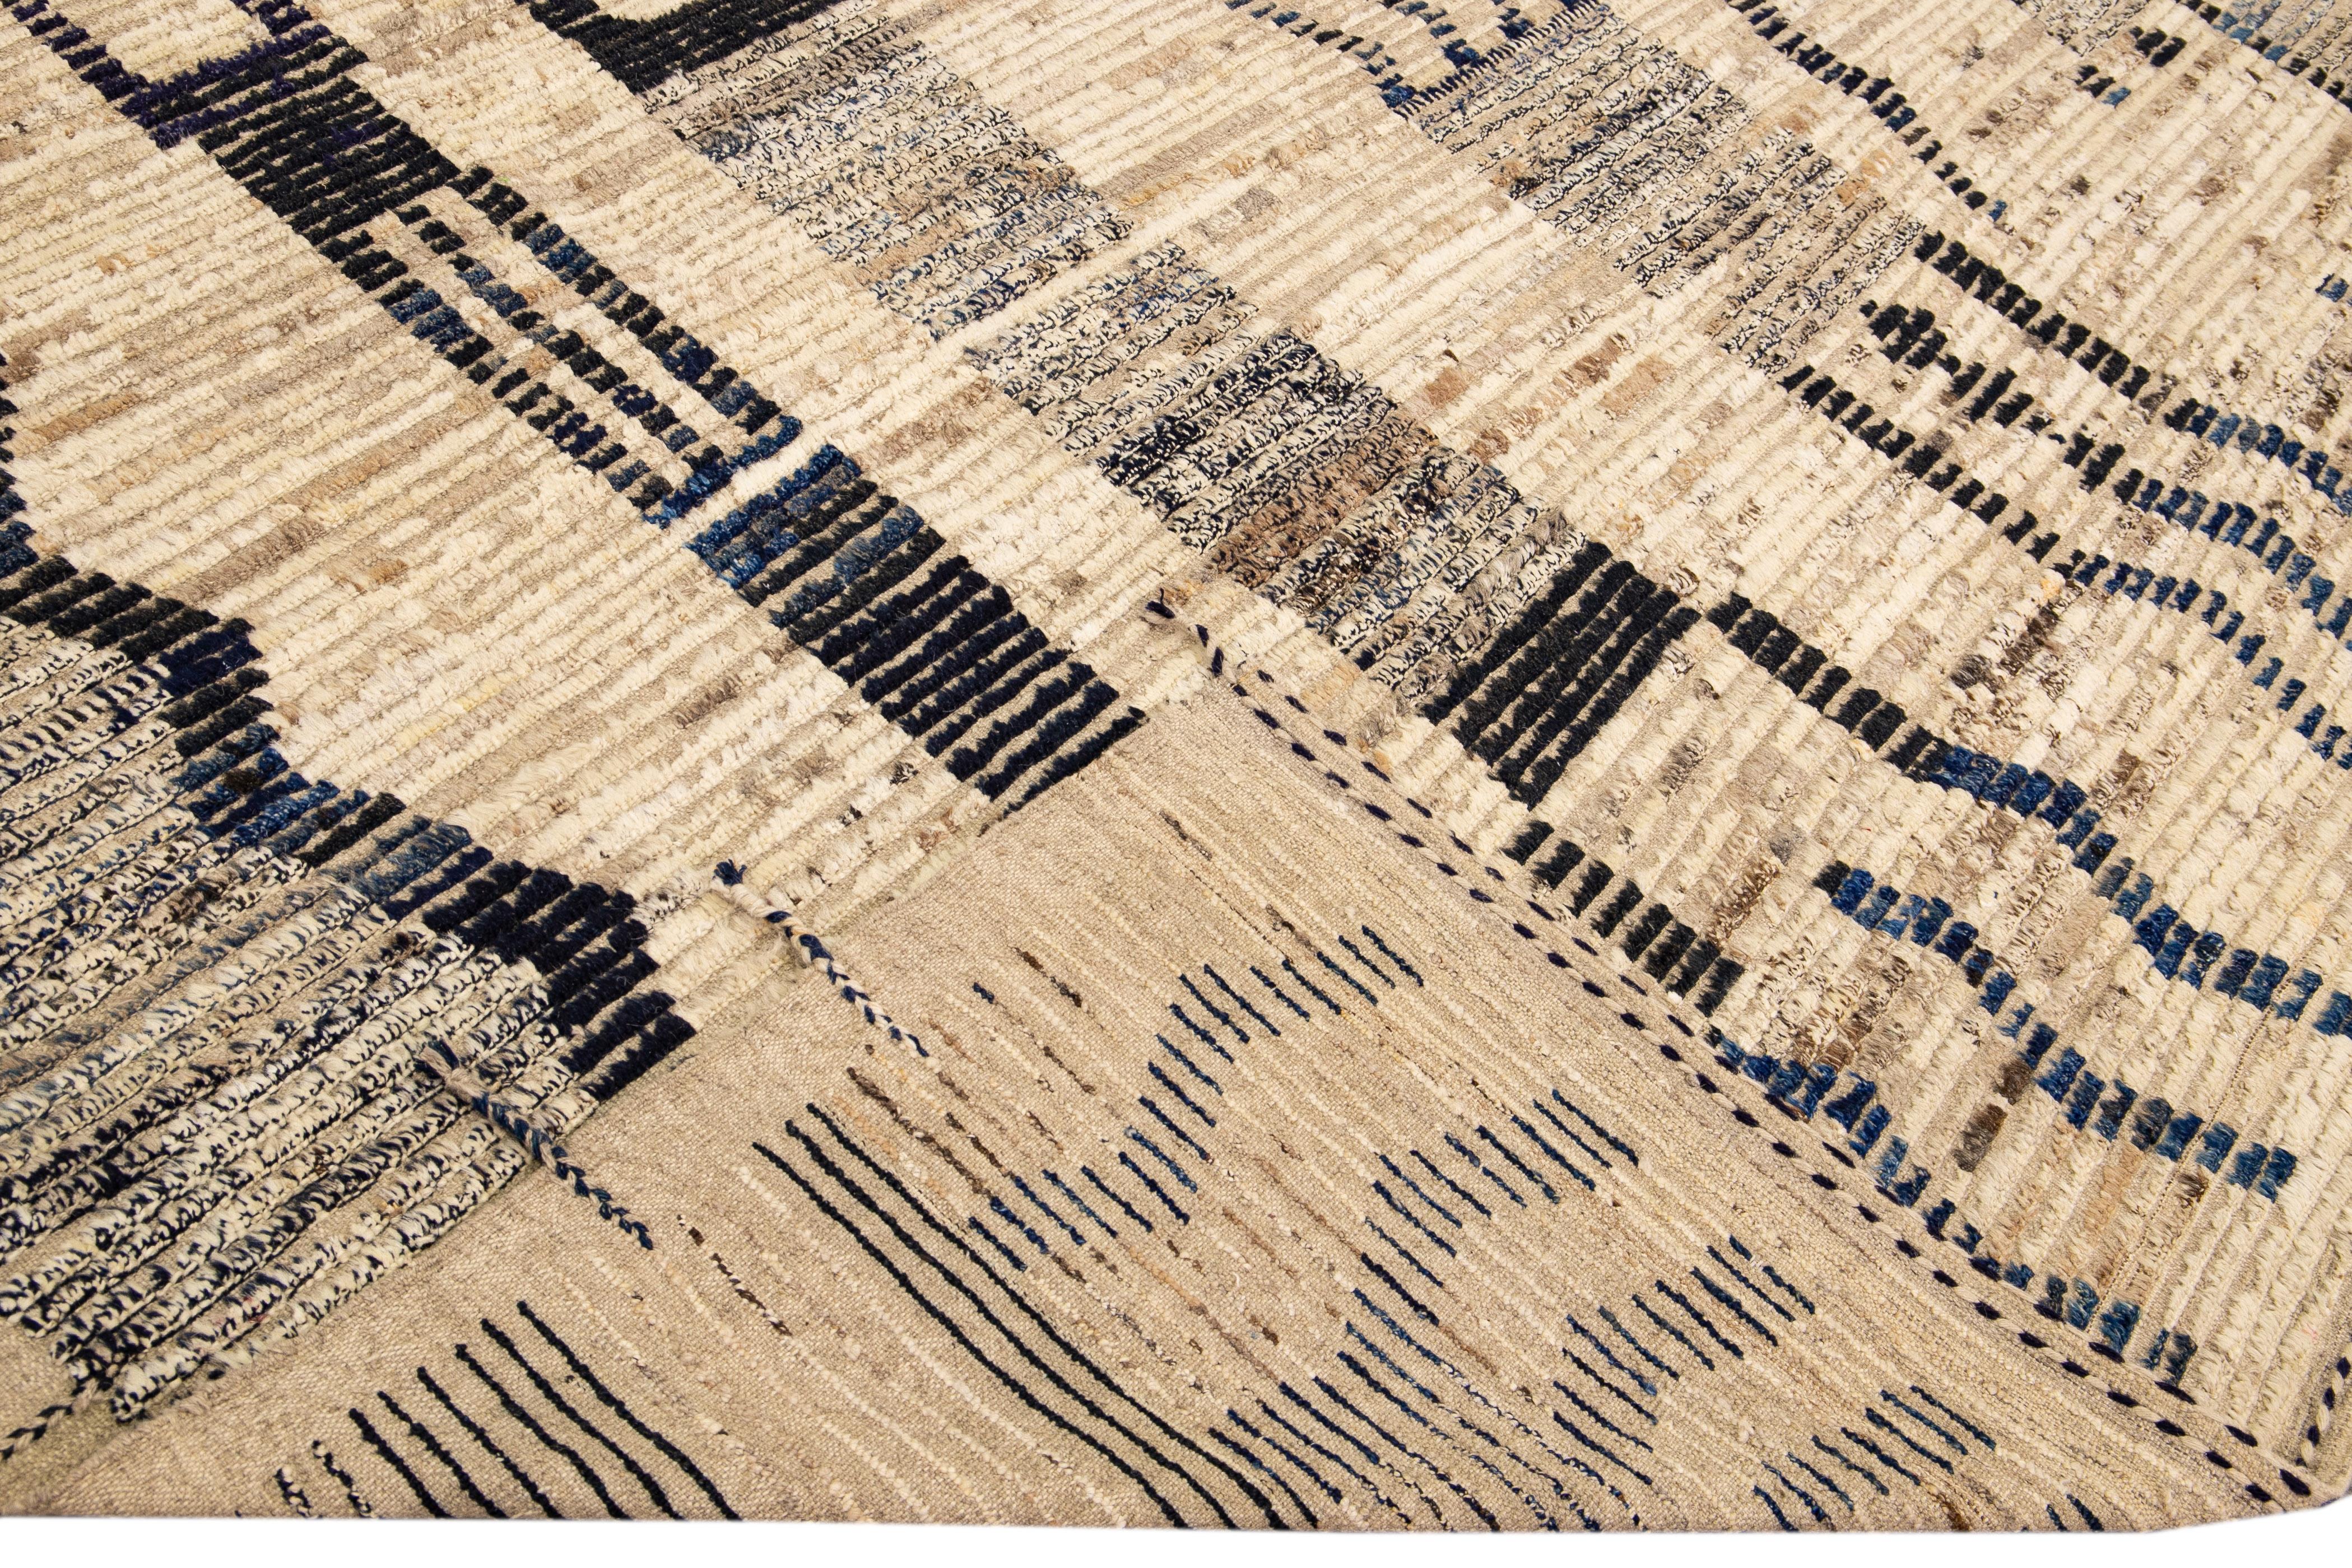 Beautiful Moroccan style handmade wool rug with a beige and brown field. This Modern rug has black and brown accents and beige-black braid fringes featuring a gorgeous all-over geometric boho design.

This rug measures: 12'4